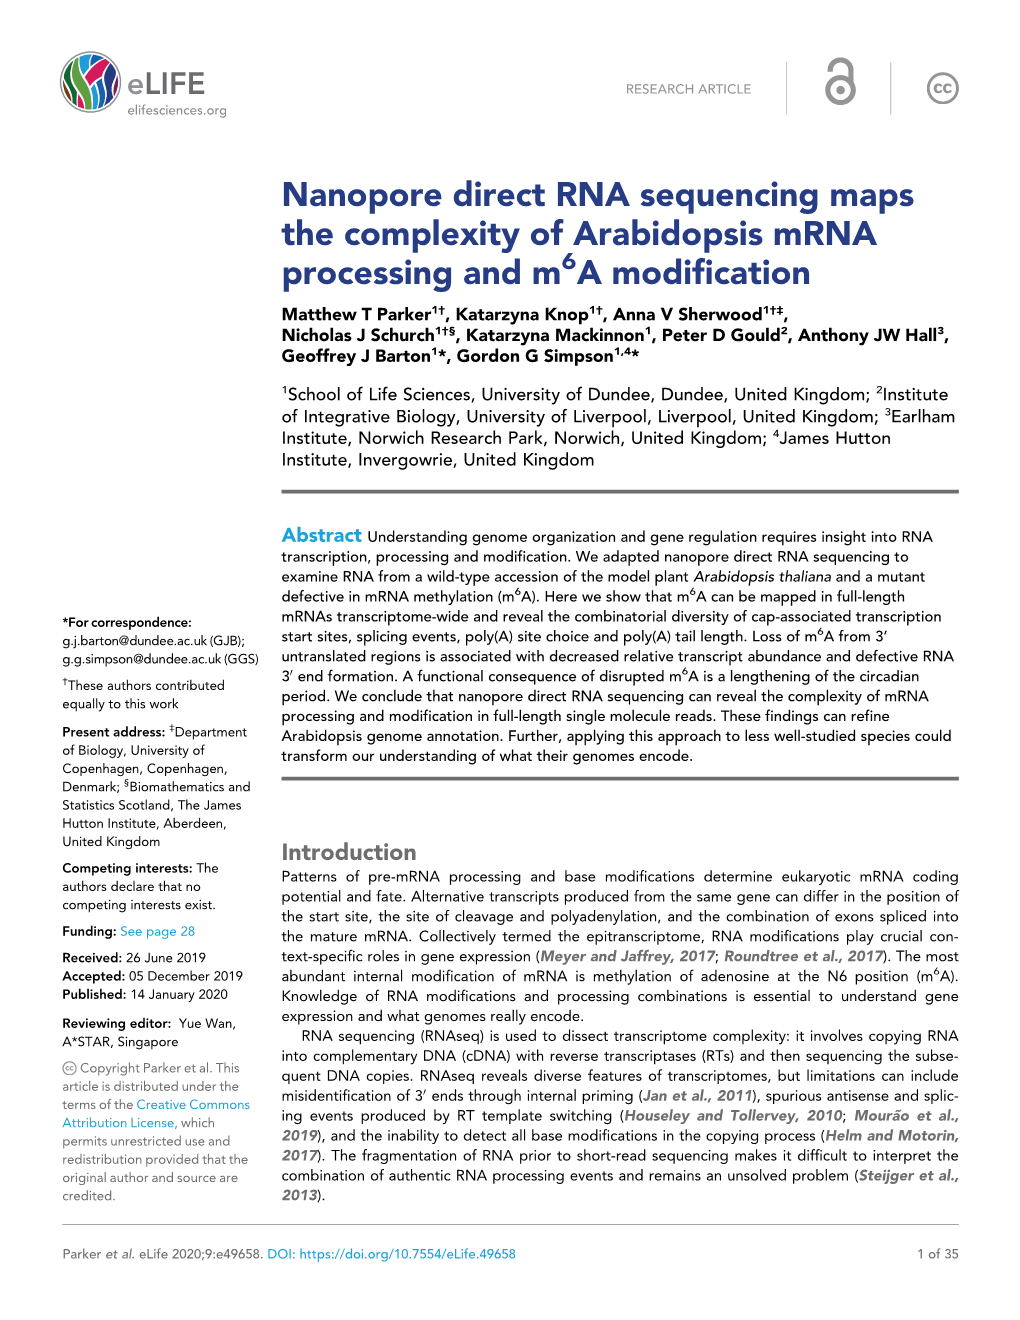 Nanopore Direct RNA Sequencing Maps the Complexity of Arabidopsis Mrna Processing and M a Modification